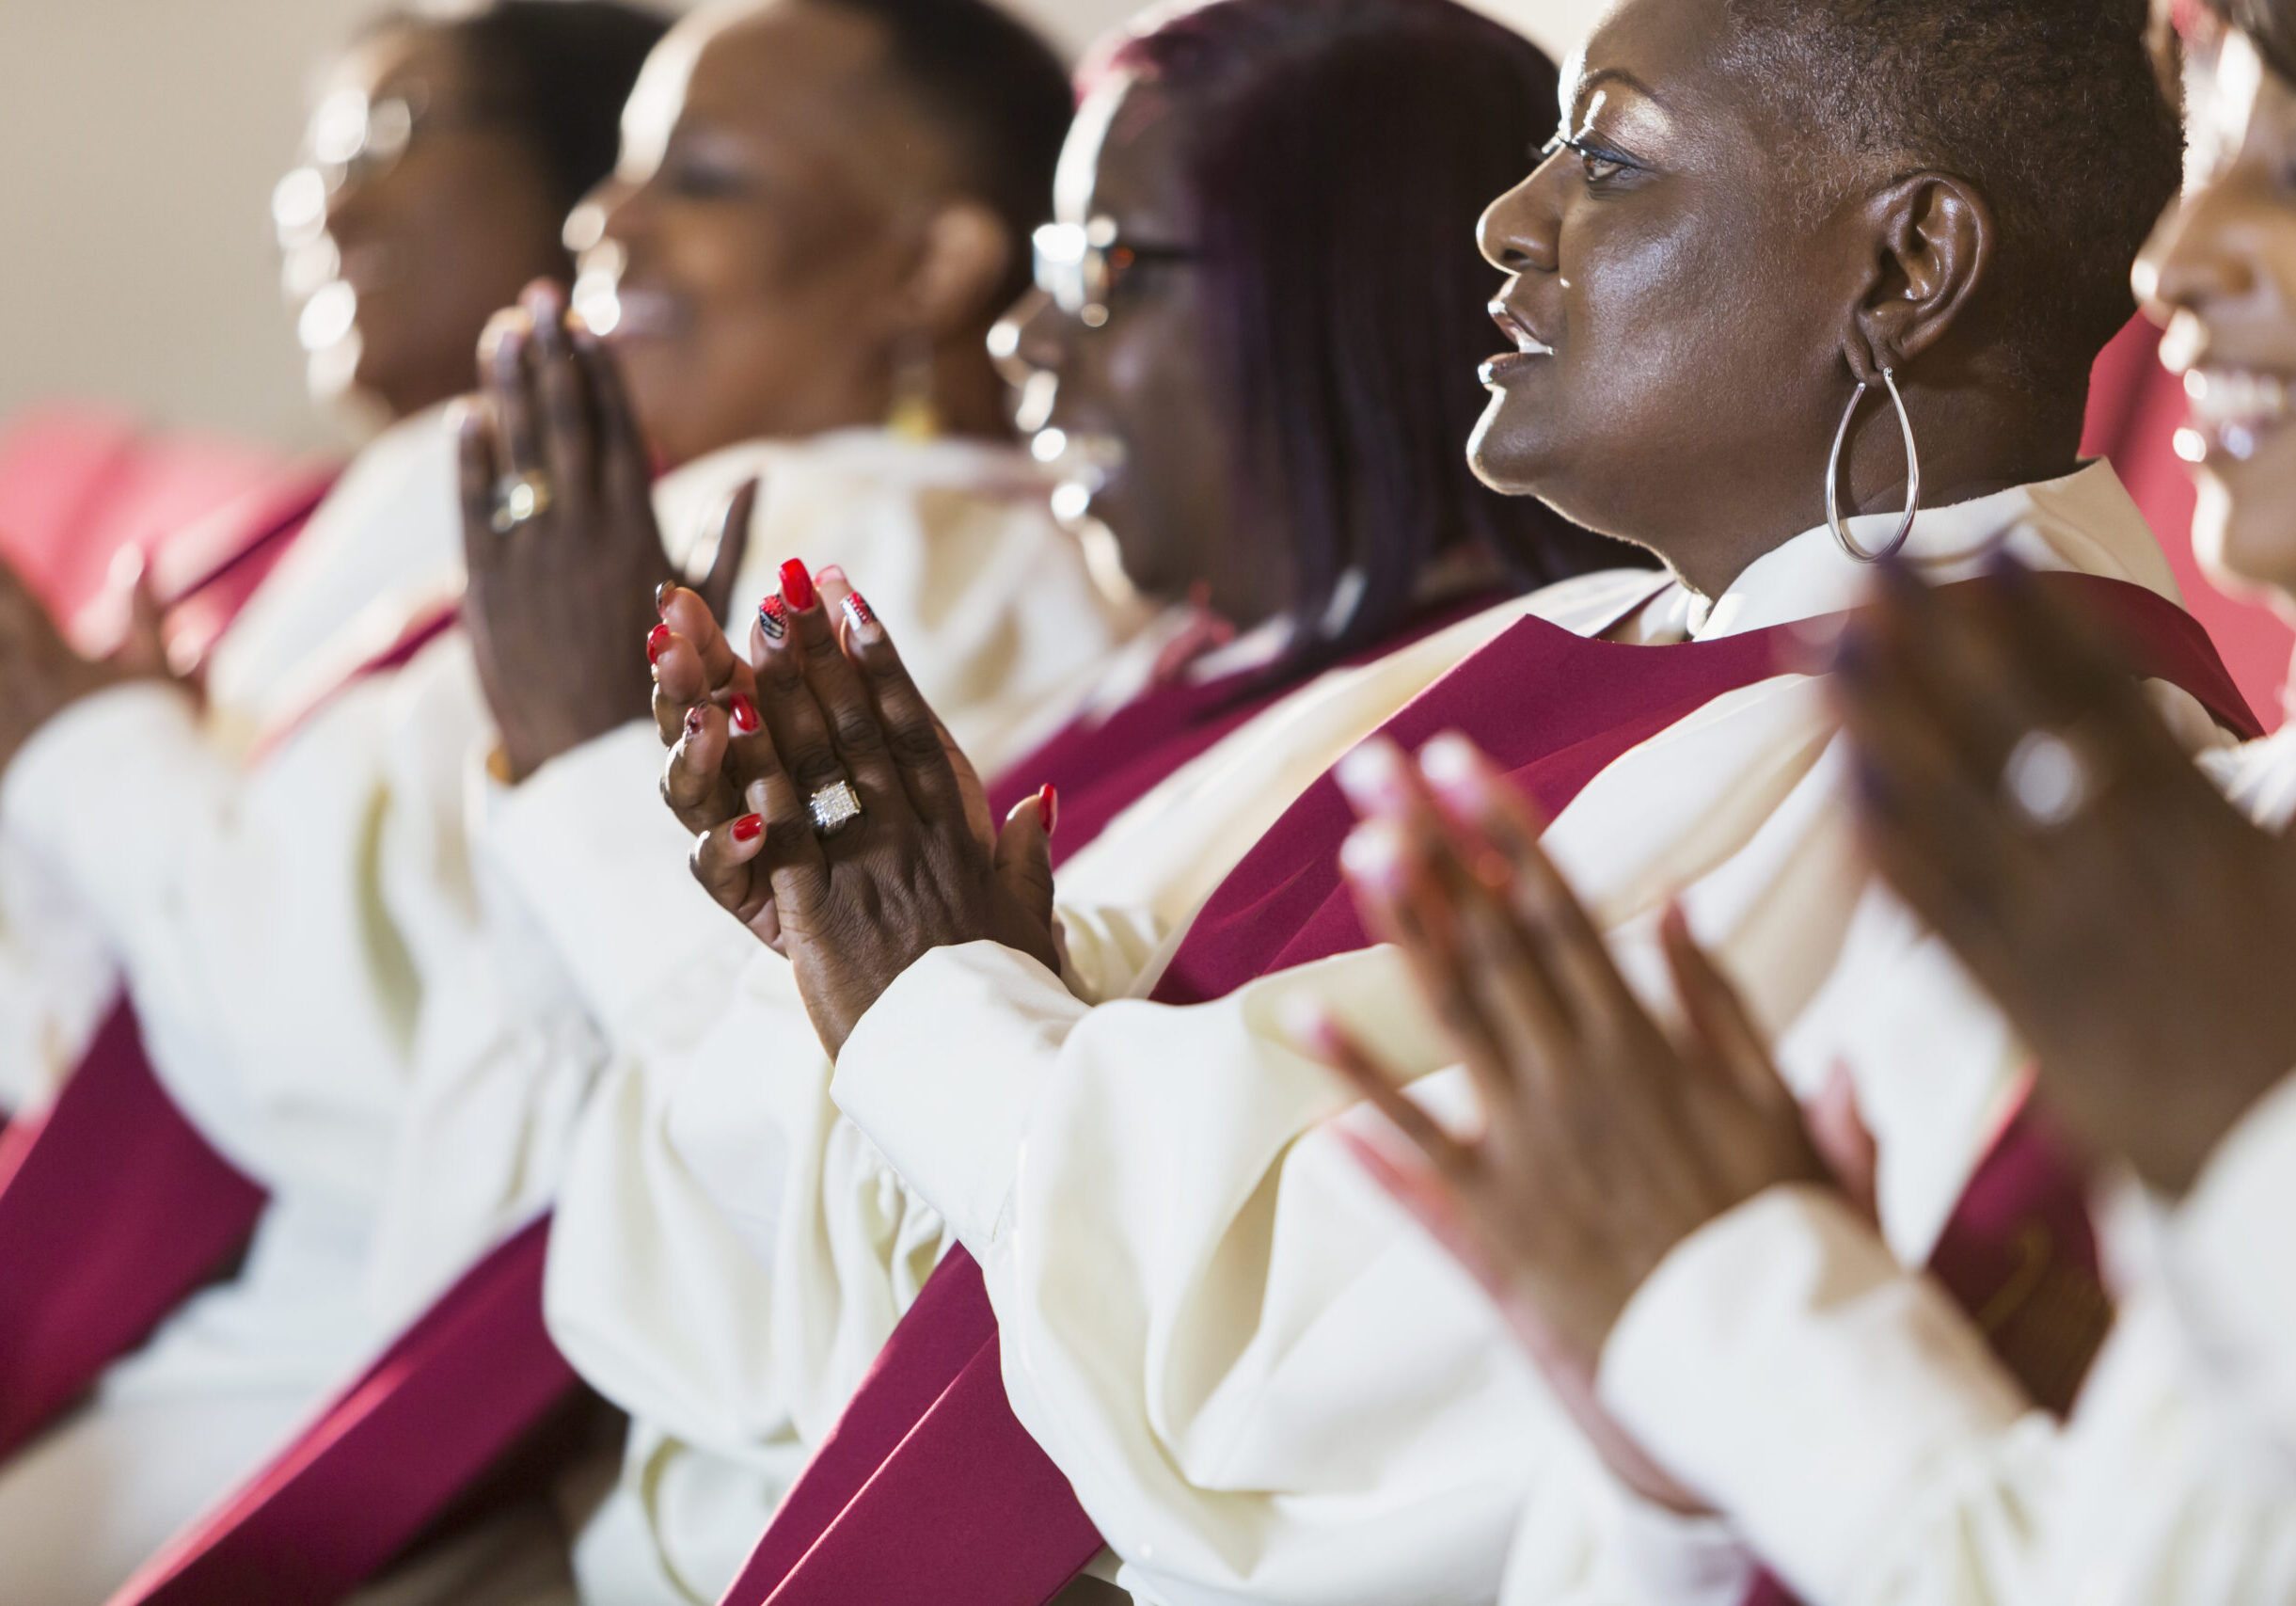 A group of mature black women in church robes, sitting in a row, clapping. They are members of the church choir listening to a sermon.